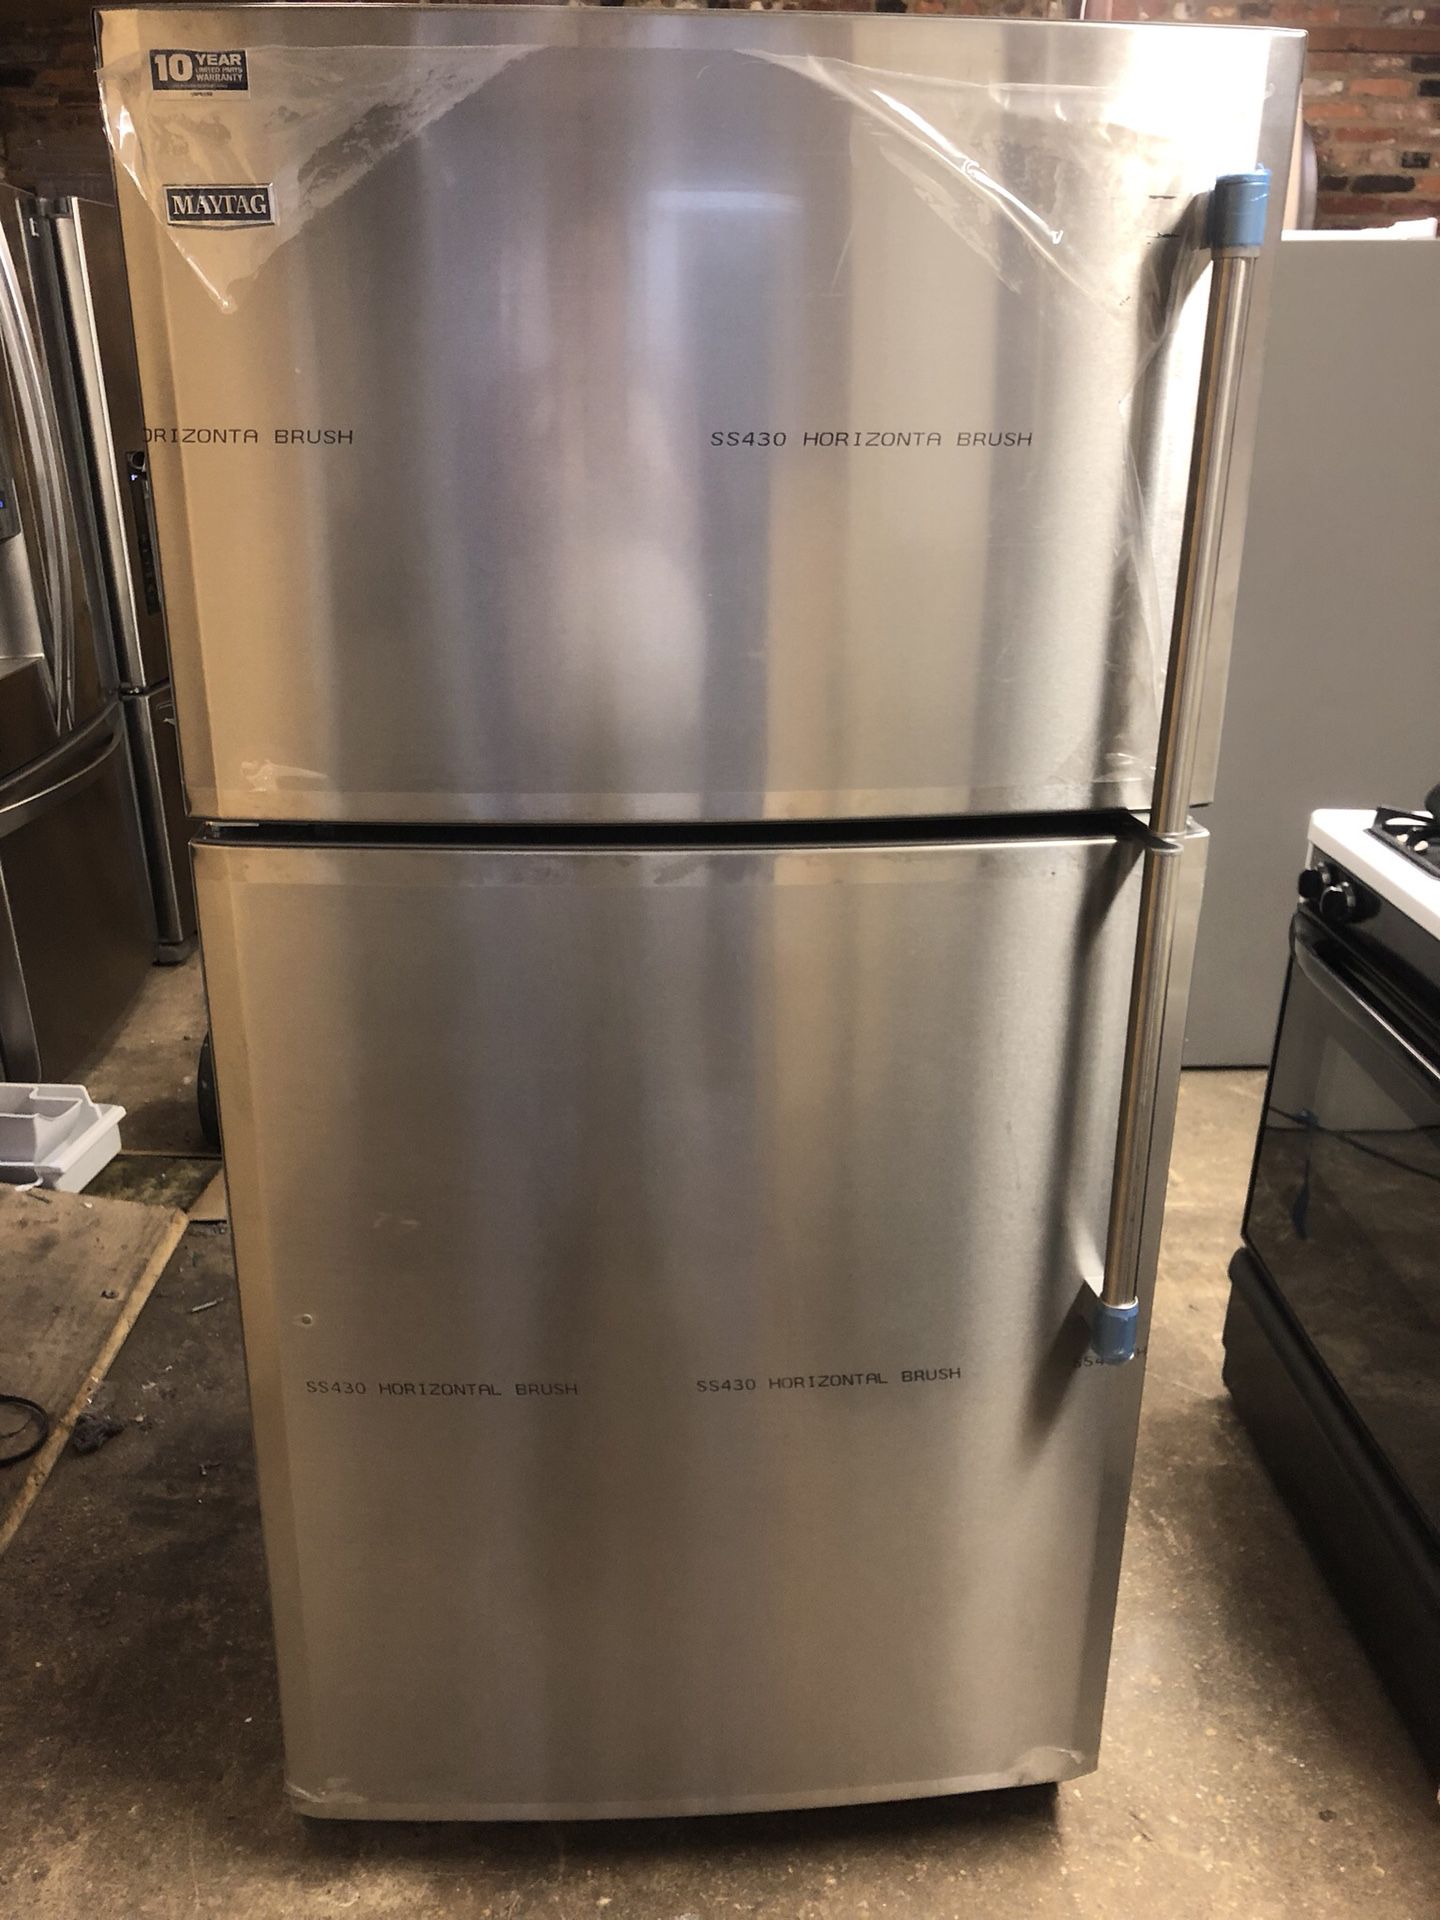 Maytag refrigerator 33” inches wide stainless steel BRAND NEW in excellent conditions